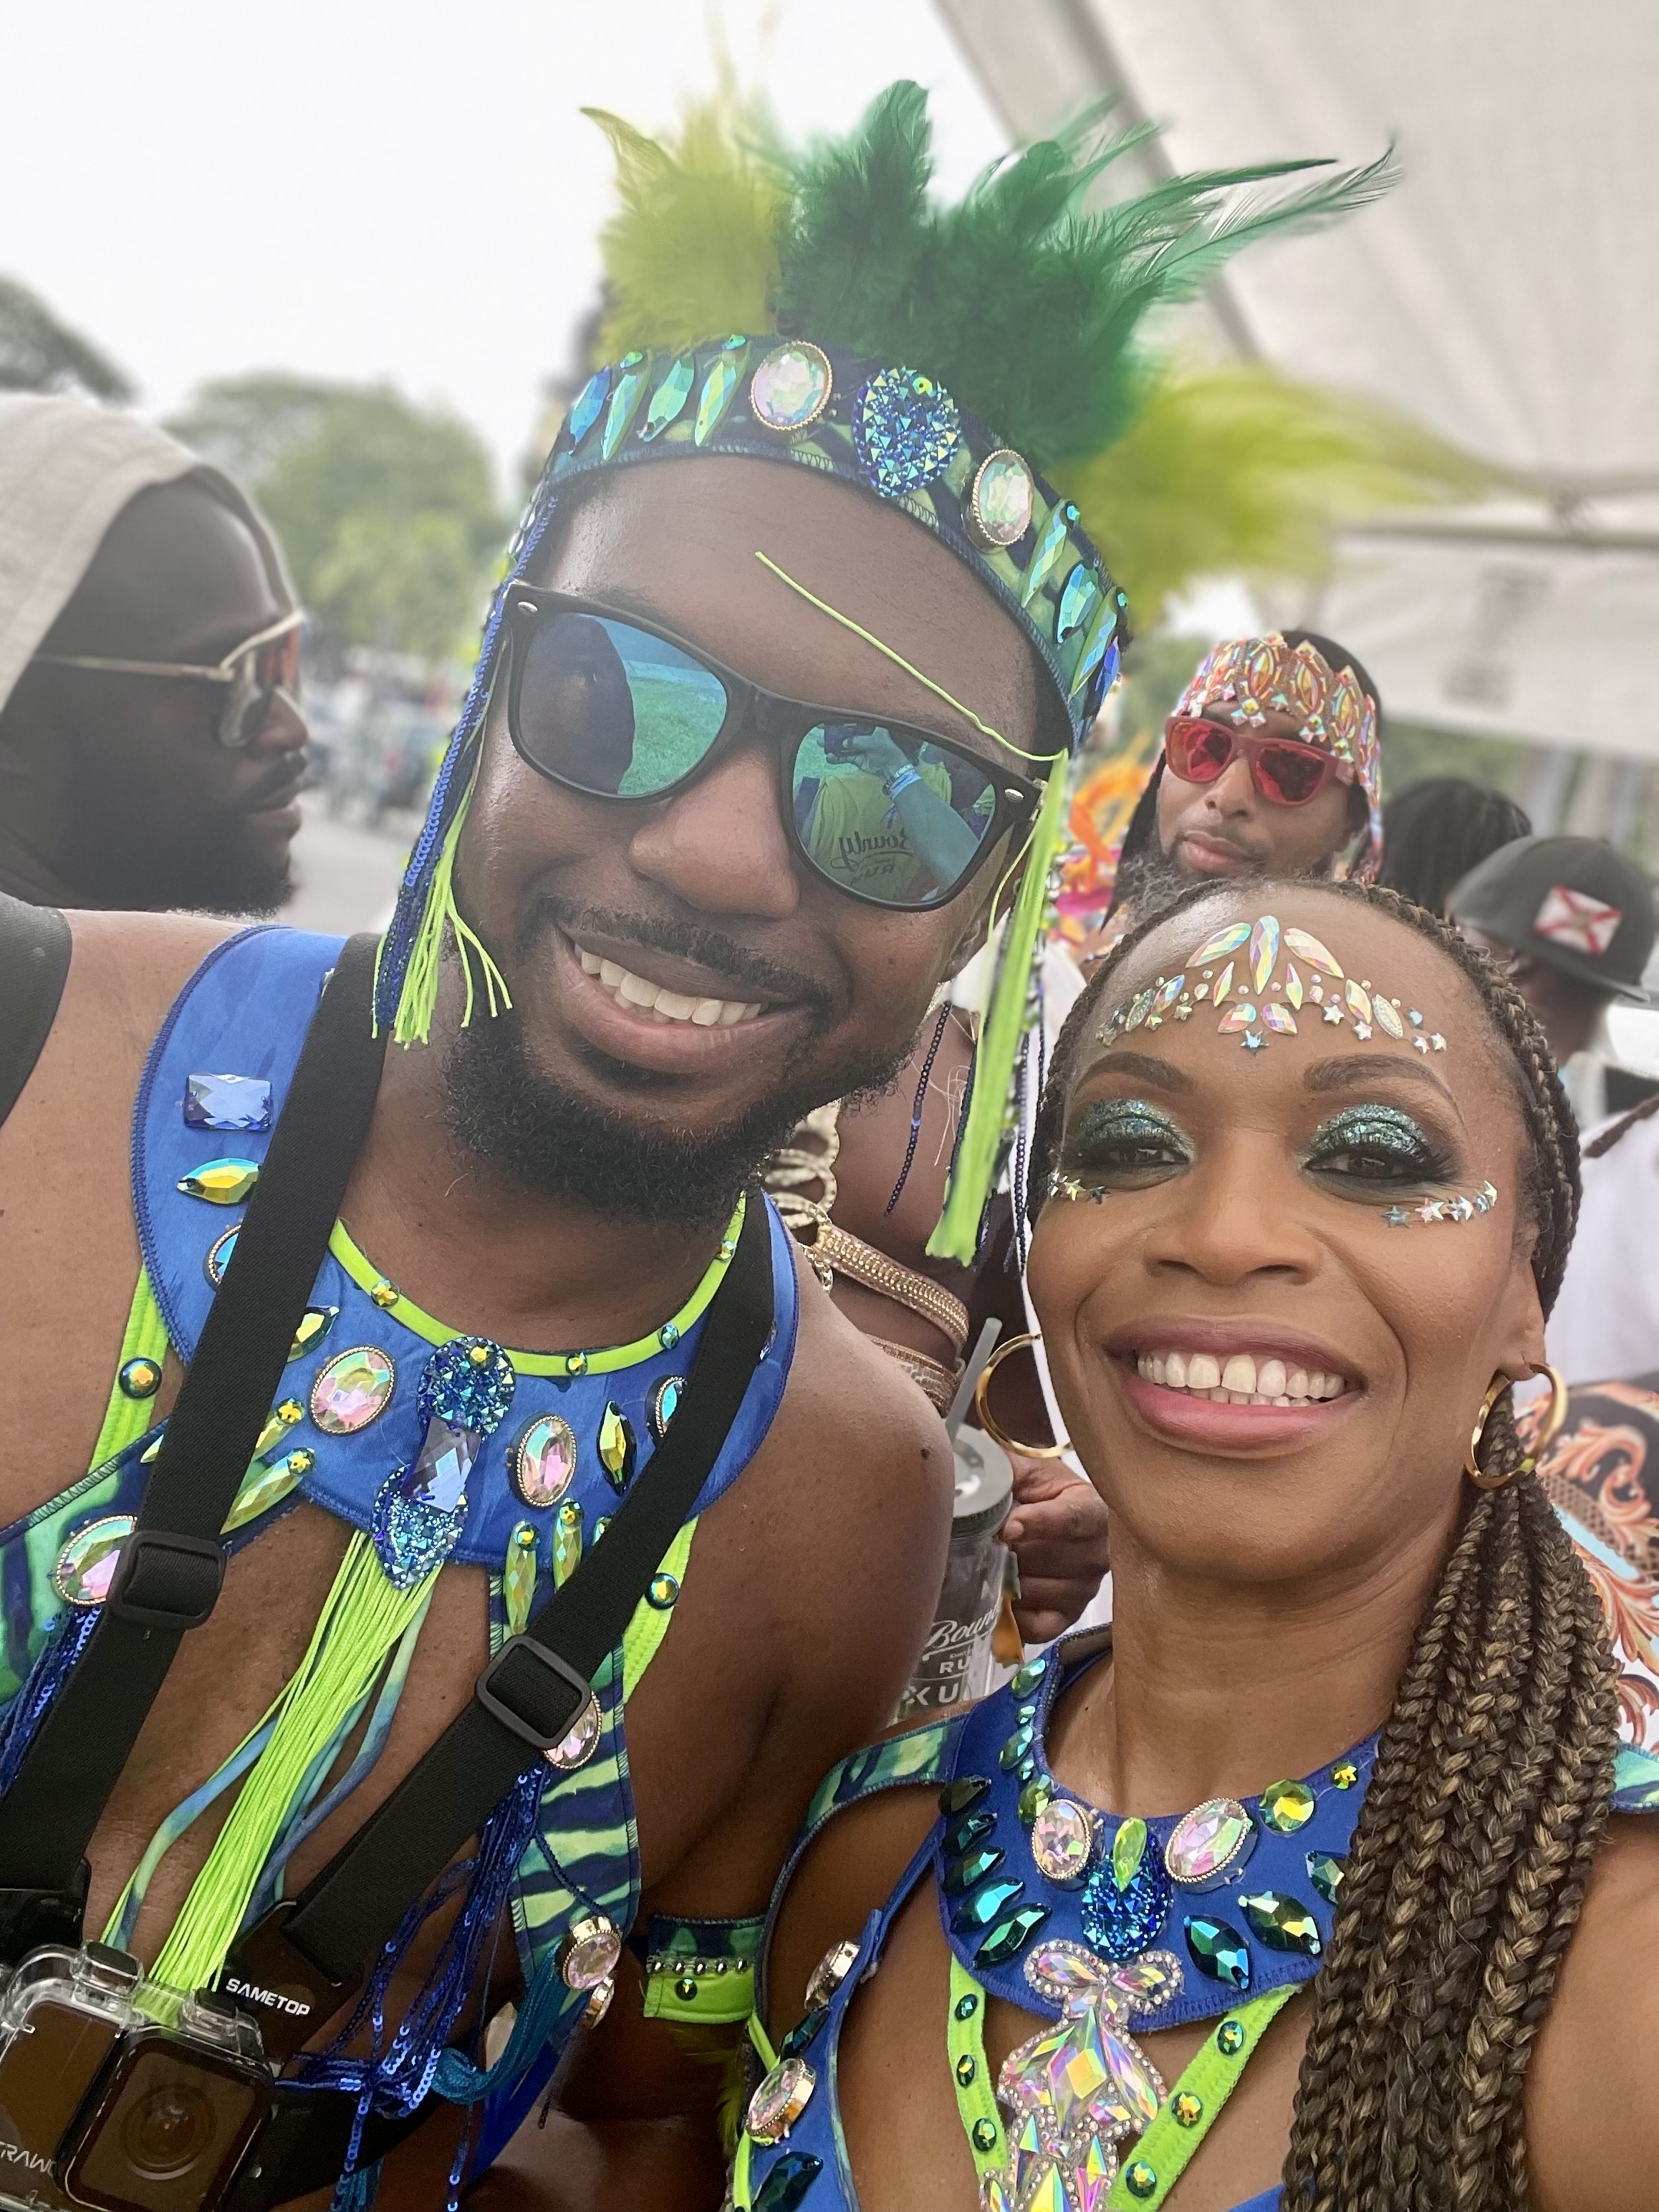 Carnival Summer Escape husband and wife couple posing together in their carnival costumes smiling